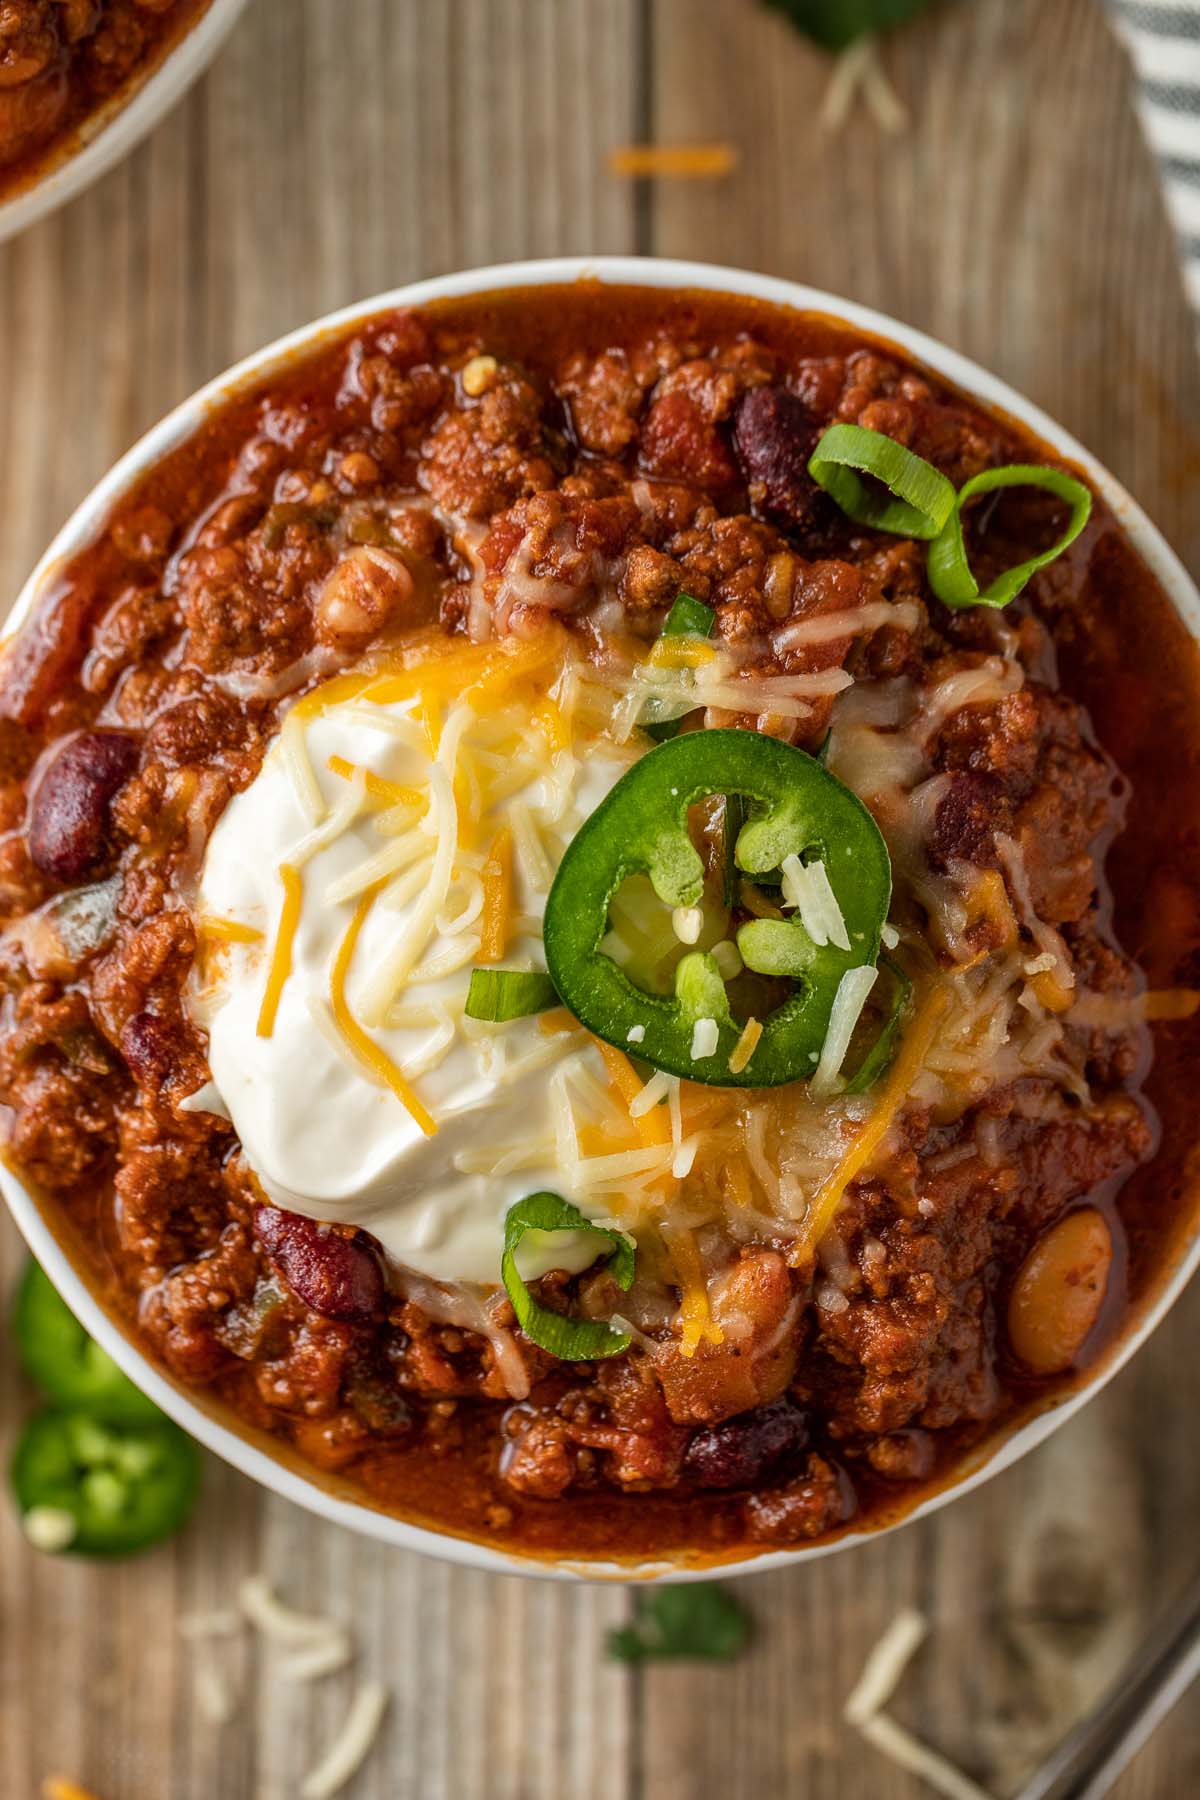 https://www.cookedbyjulie.com/wp-content/uploads/2022/05/crockpot-chili-two.jpg